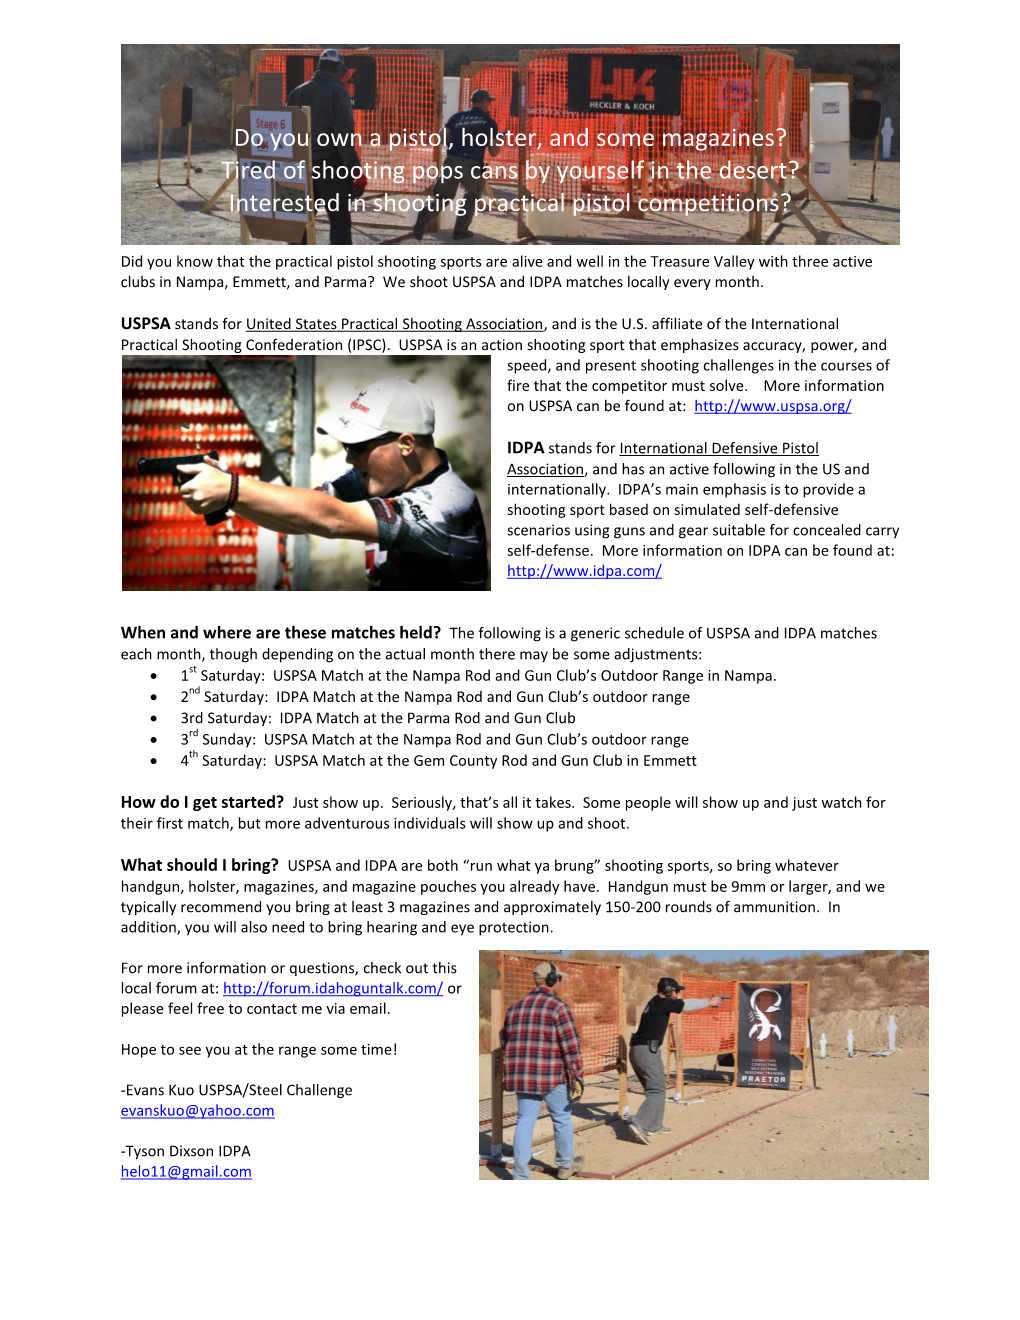 Do You Own a Pistol, Holster, and Some Magazines? Tired of Shooting Pops Cans by Yourself in the Desert? Interested in Shooting Practical Pistol Competitions?